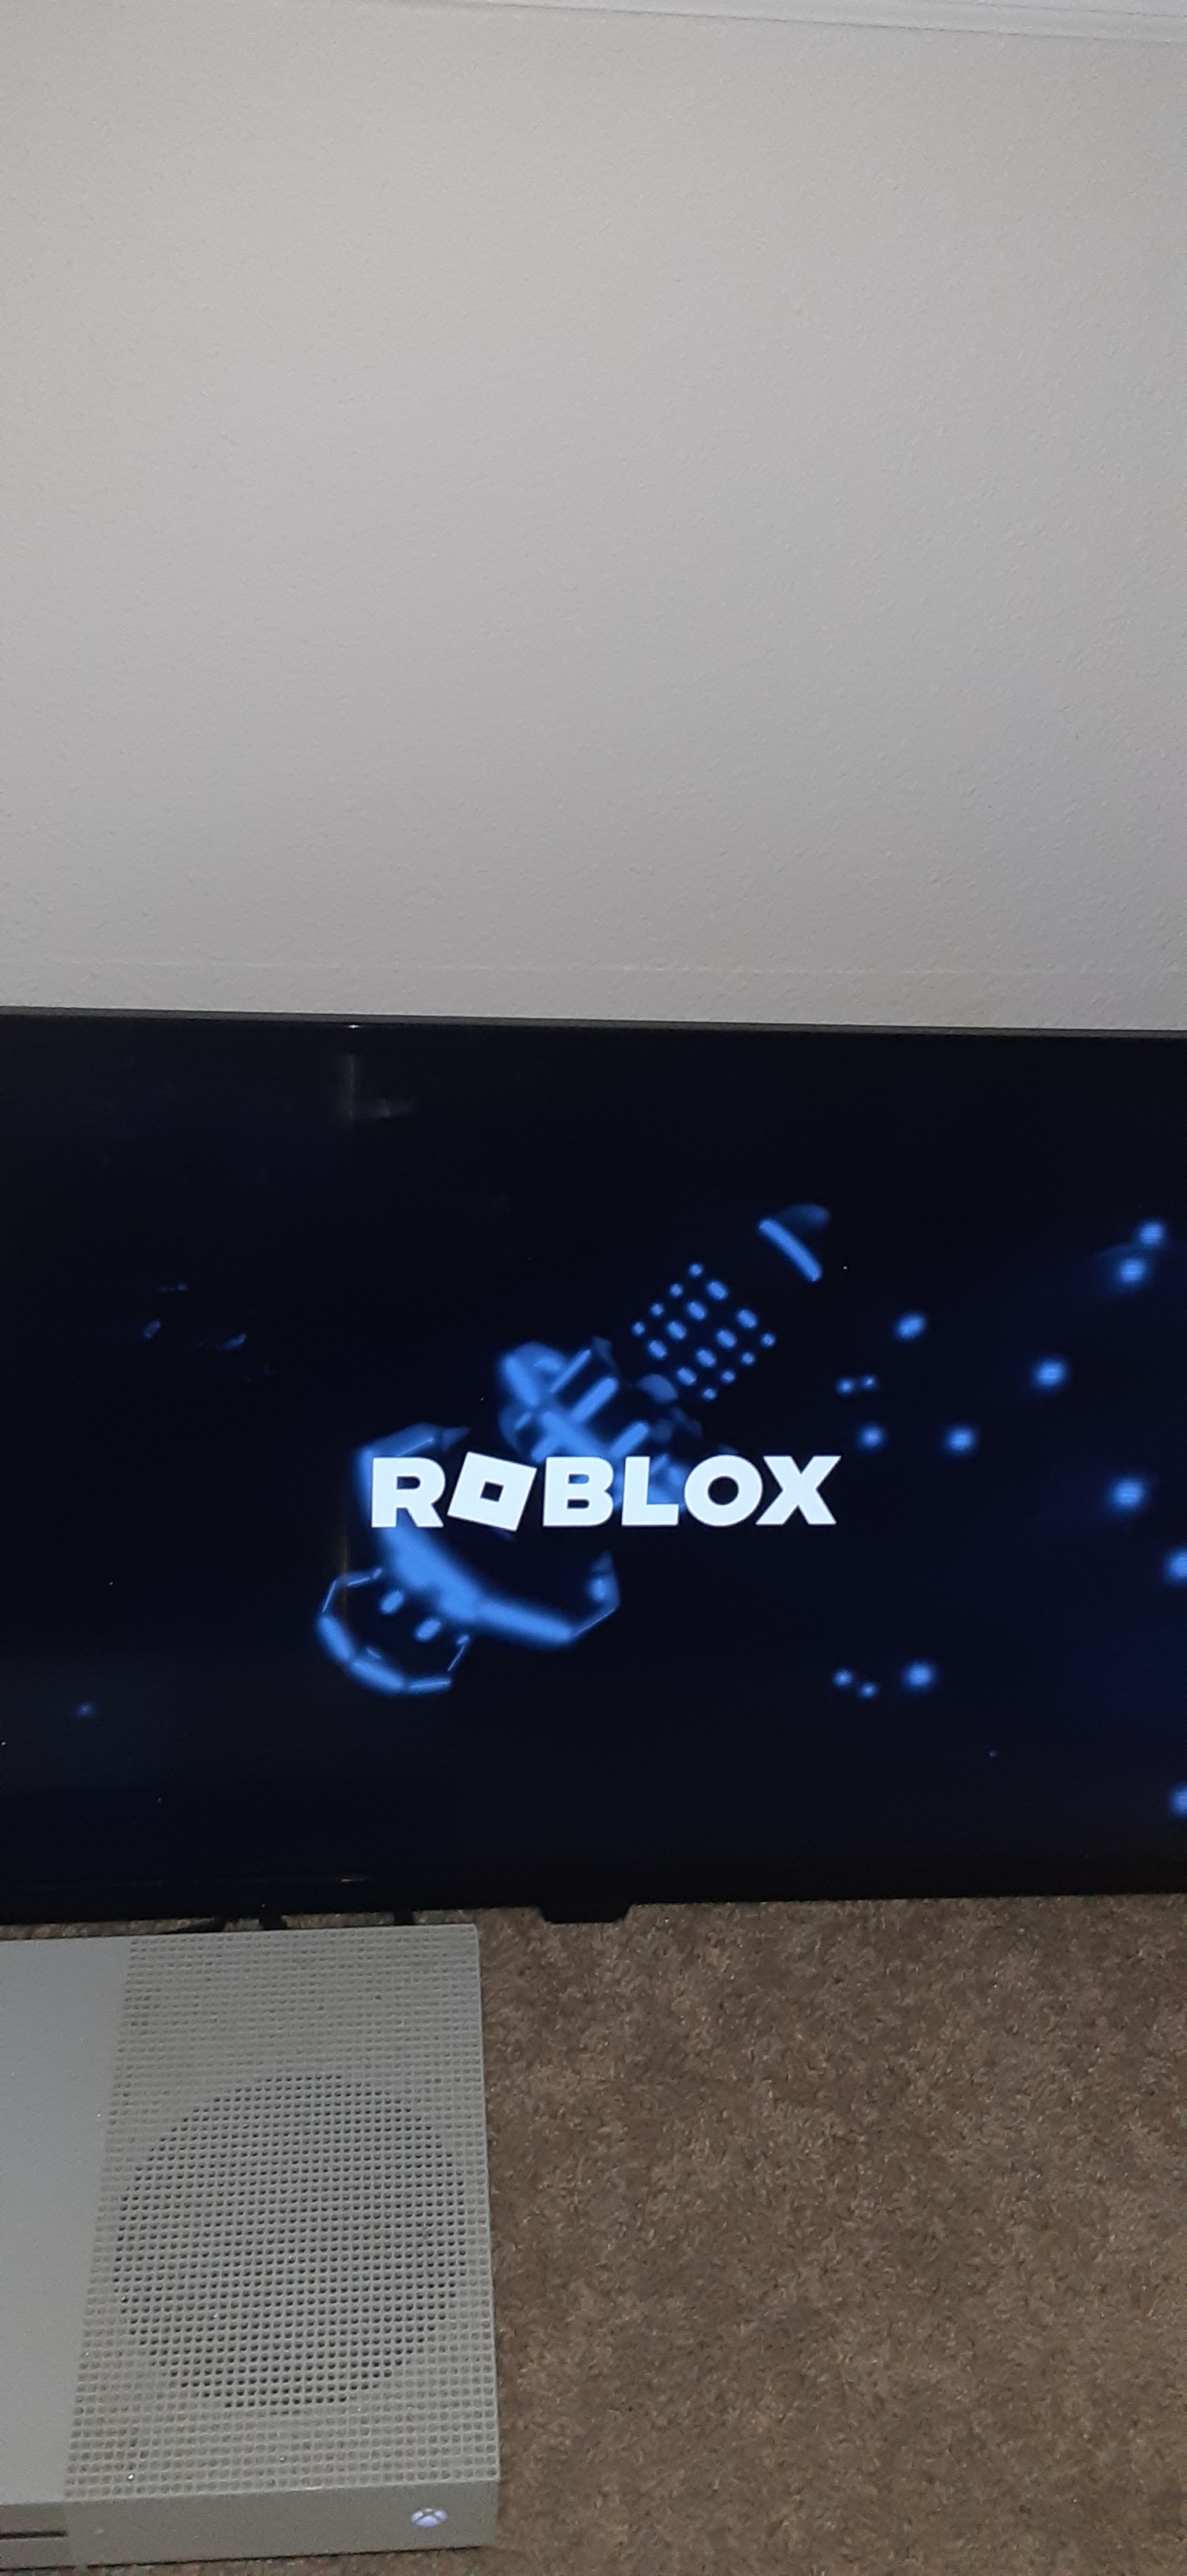 Unable to Download - Roblox was not able to update - Platform